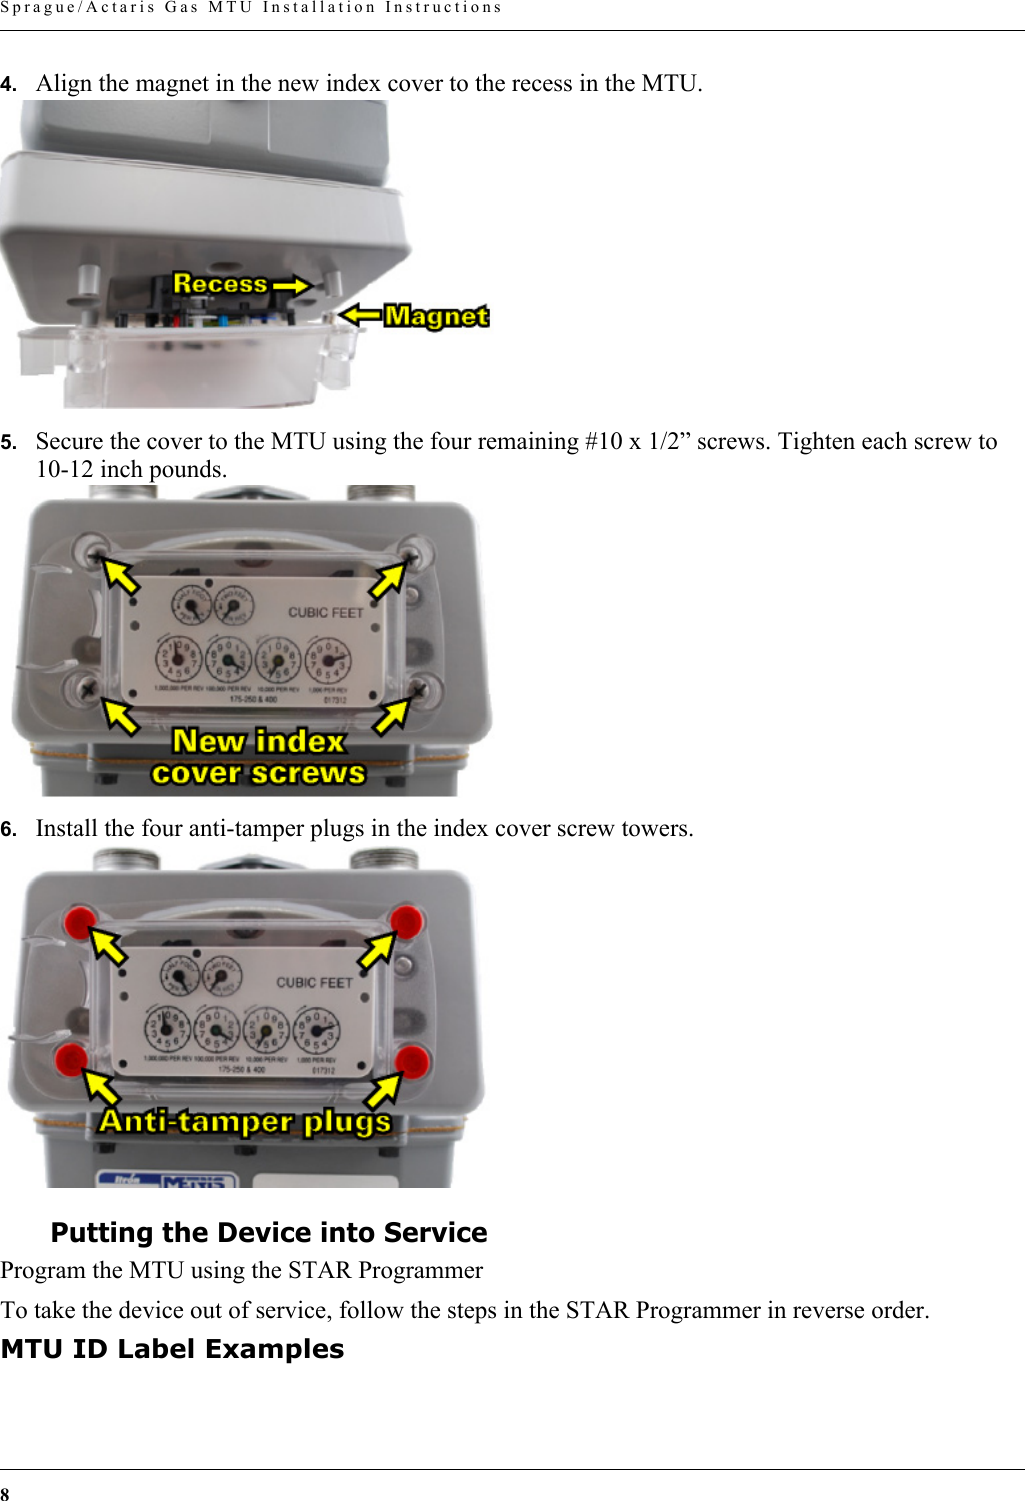 8 Sprague/Actaris Gas MTU Installation Instructions4. Align the magnet in the new index cover to the recess in the MTU.5. Secure the cover to the MTU using the four remaining #10 x 1/2” screws. Tighten each screw to 10-12 inch pounds.6. Install the four anti-tamper plugs in the index cover screw towers.Putting the Device into ServiceProgram the MTU using the STAR ProgrammerTo take the device out of service, follow the steps in the STAR Programmer in reverse order.MTU ID Label Examples